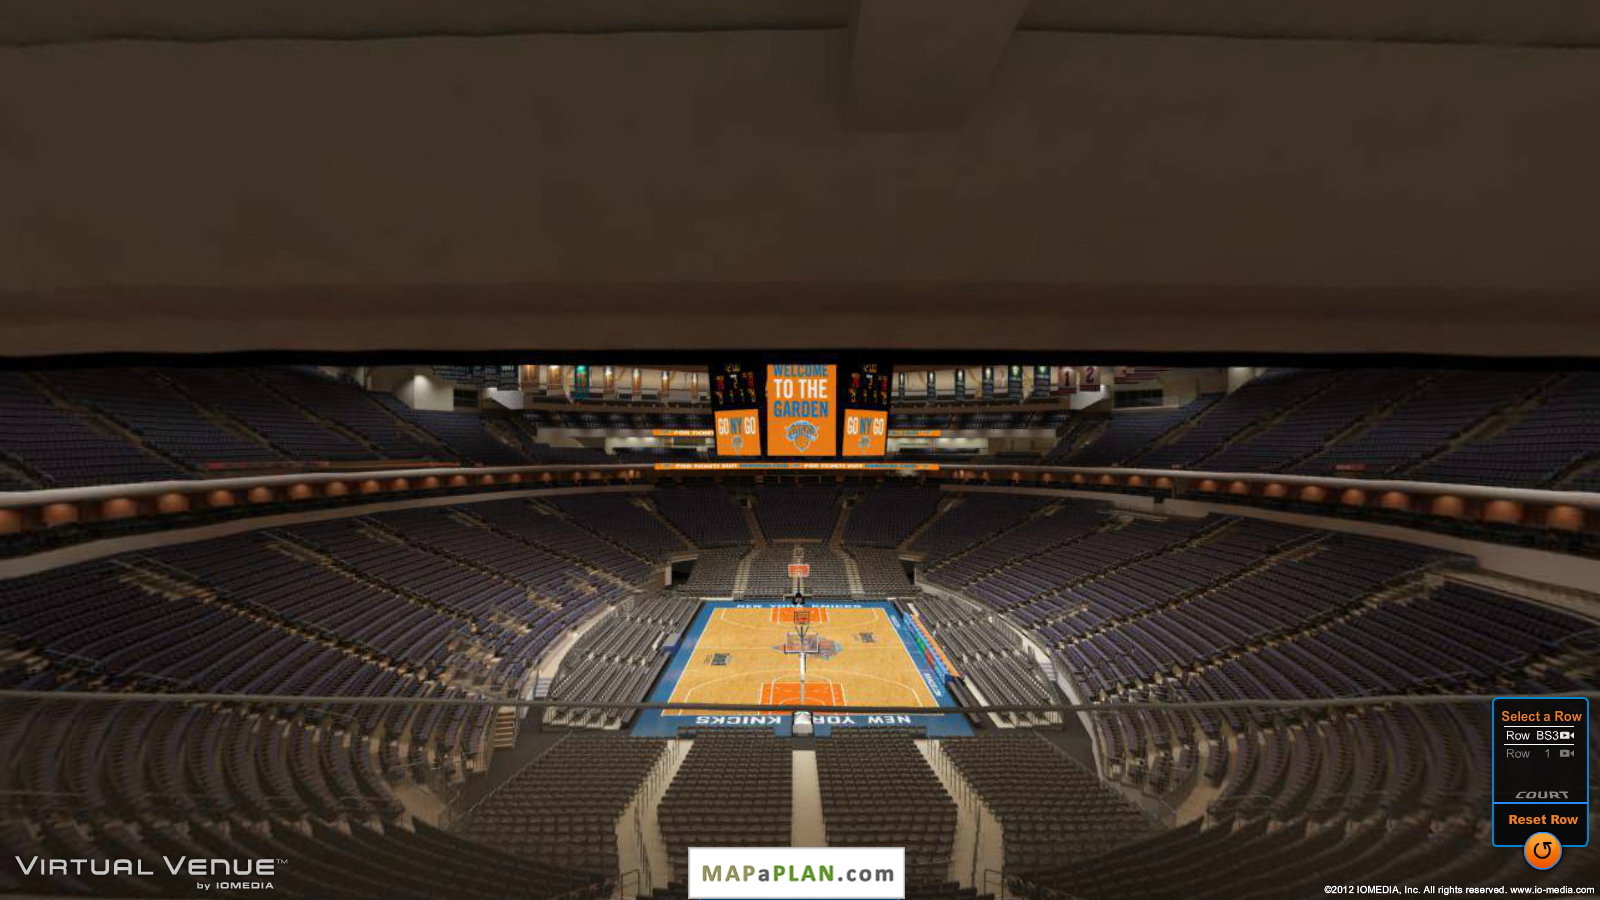 Madison square garden seating chart View from section 204